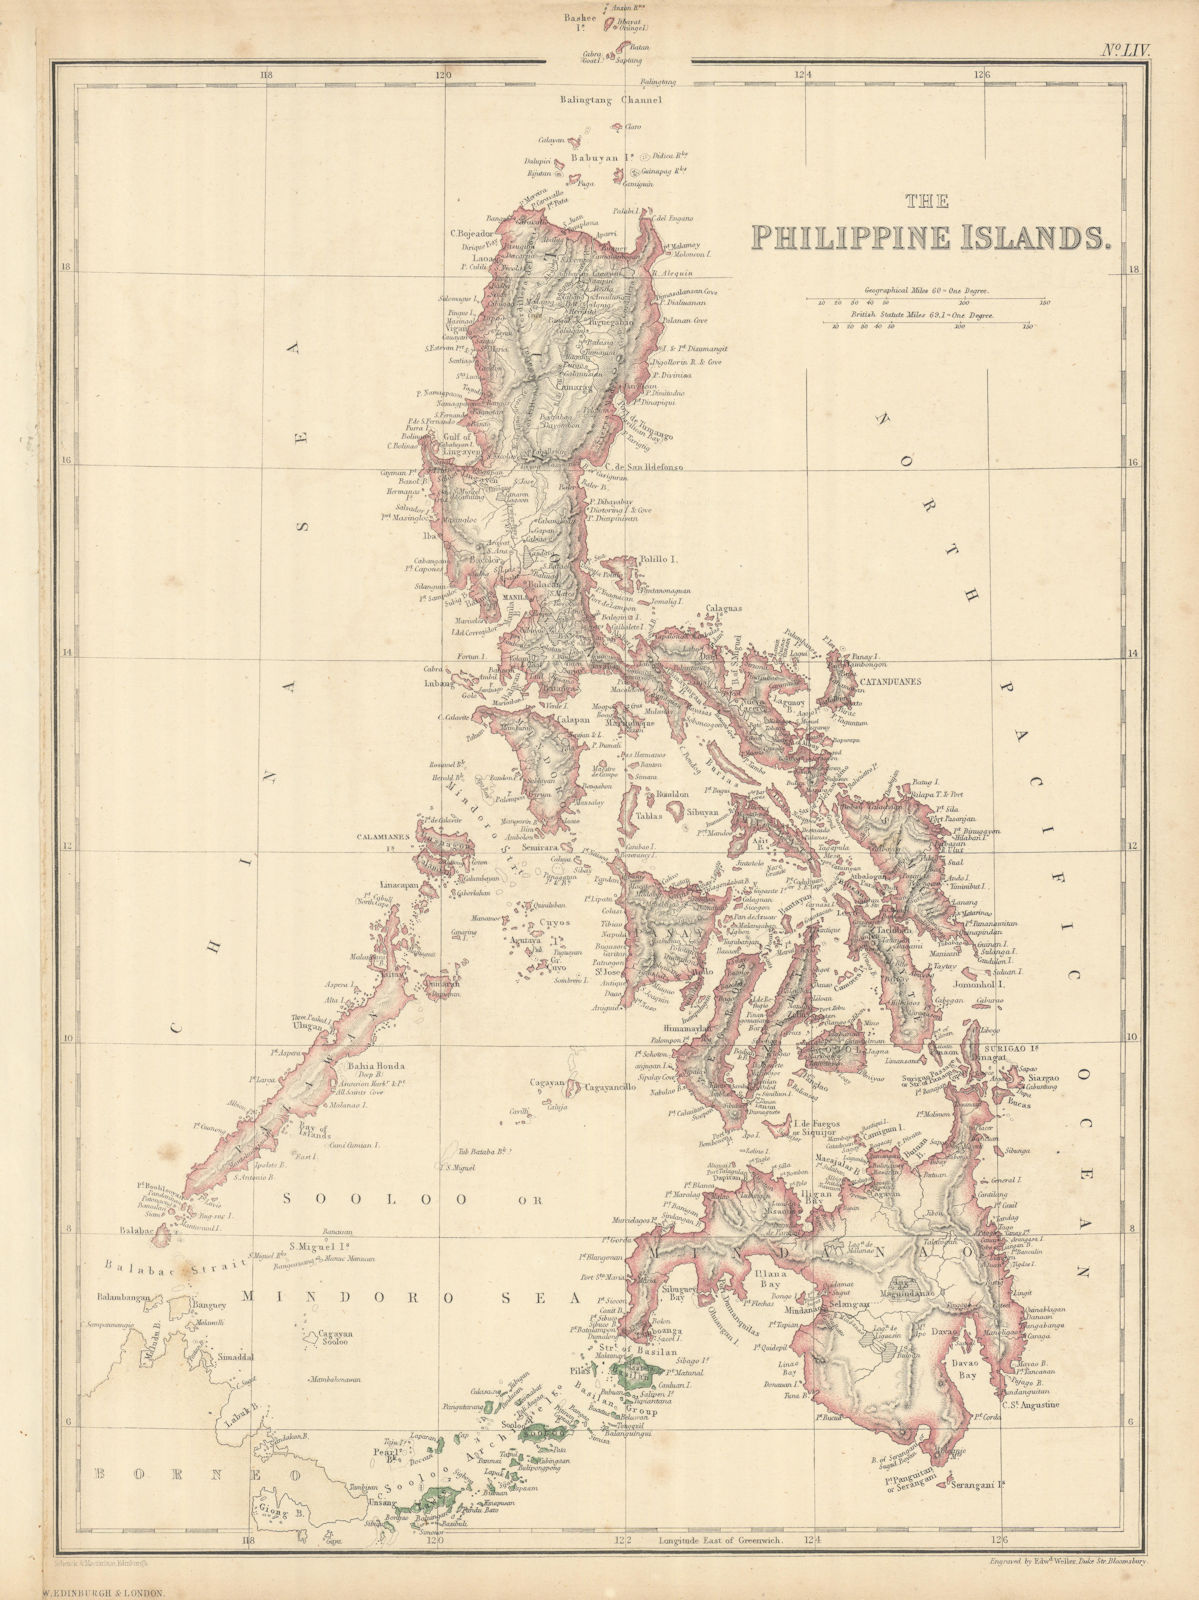 The Philippine Islands by Edward Weller. Philippines 1860 old antique map